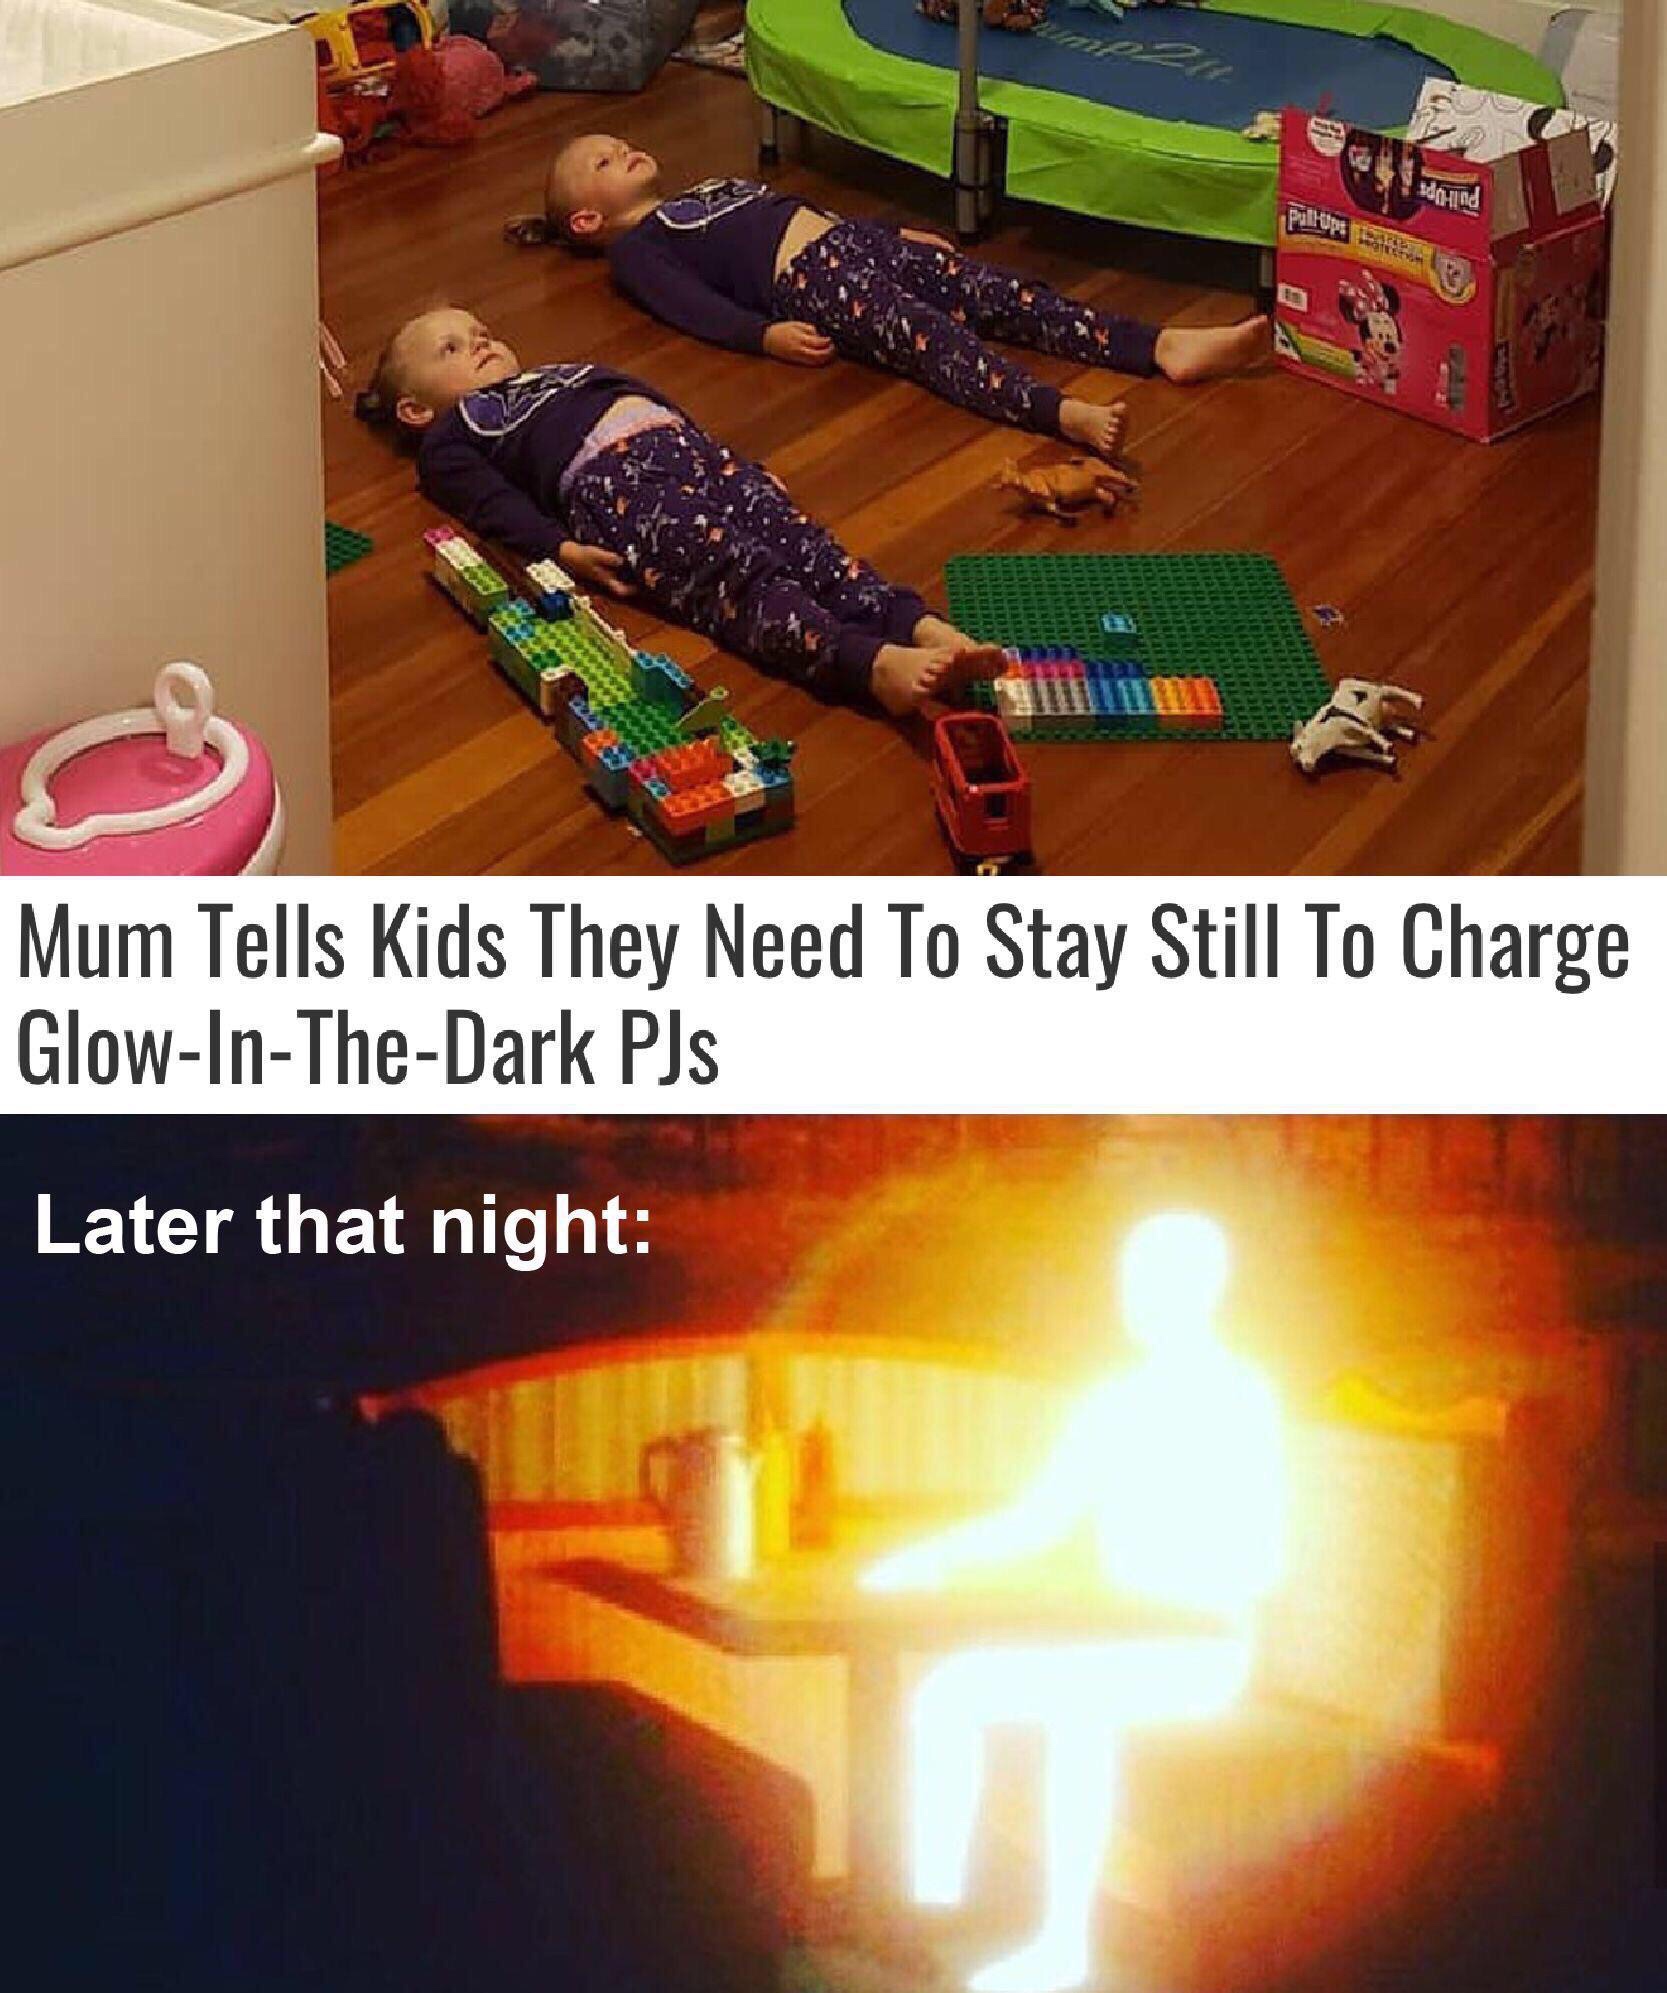 Pajamas - Mum Tells Kids They Need To Stay Still To Charge GlowInTheDark Pjs Later that night